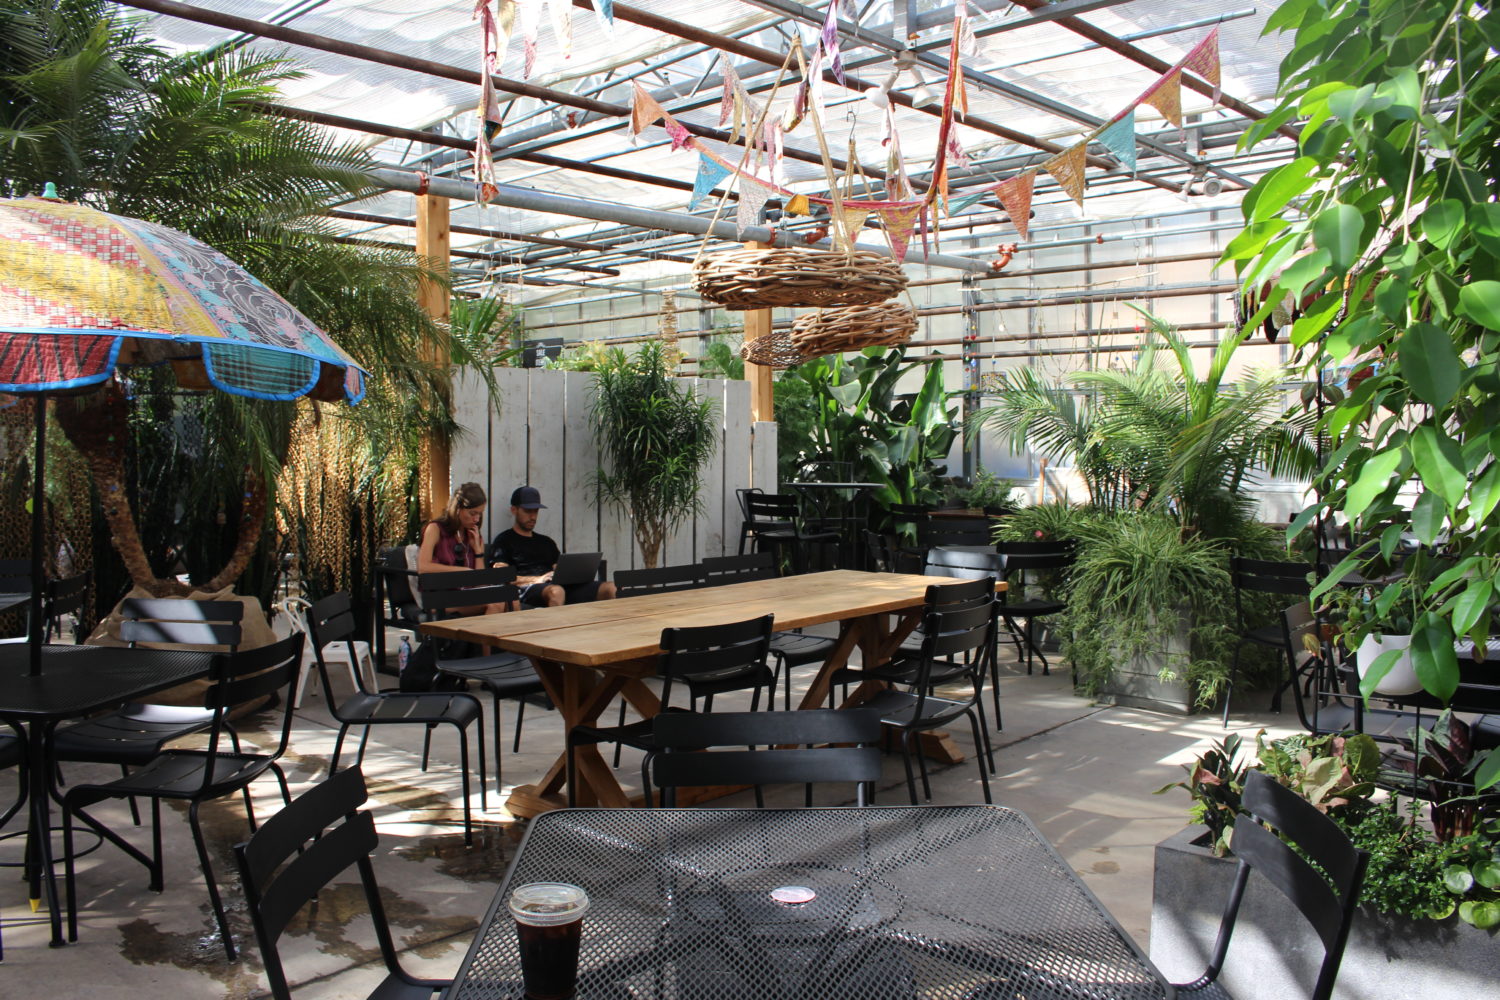 Botanically inspired Café Equinox operates inside the Shawnee location, with plenty of seating in the greenhouse.